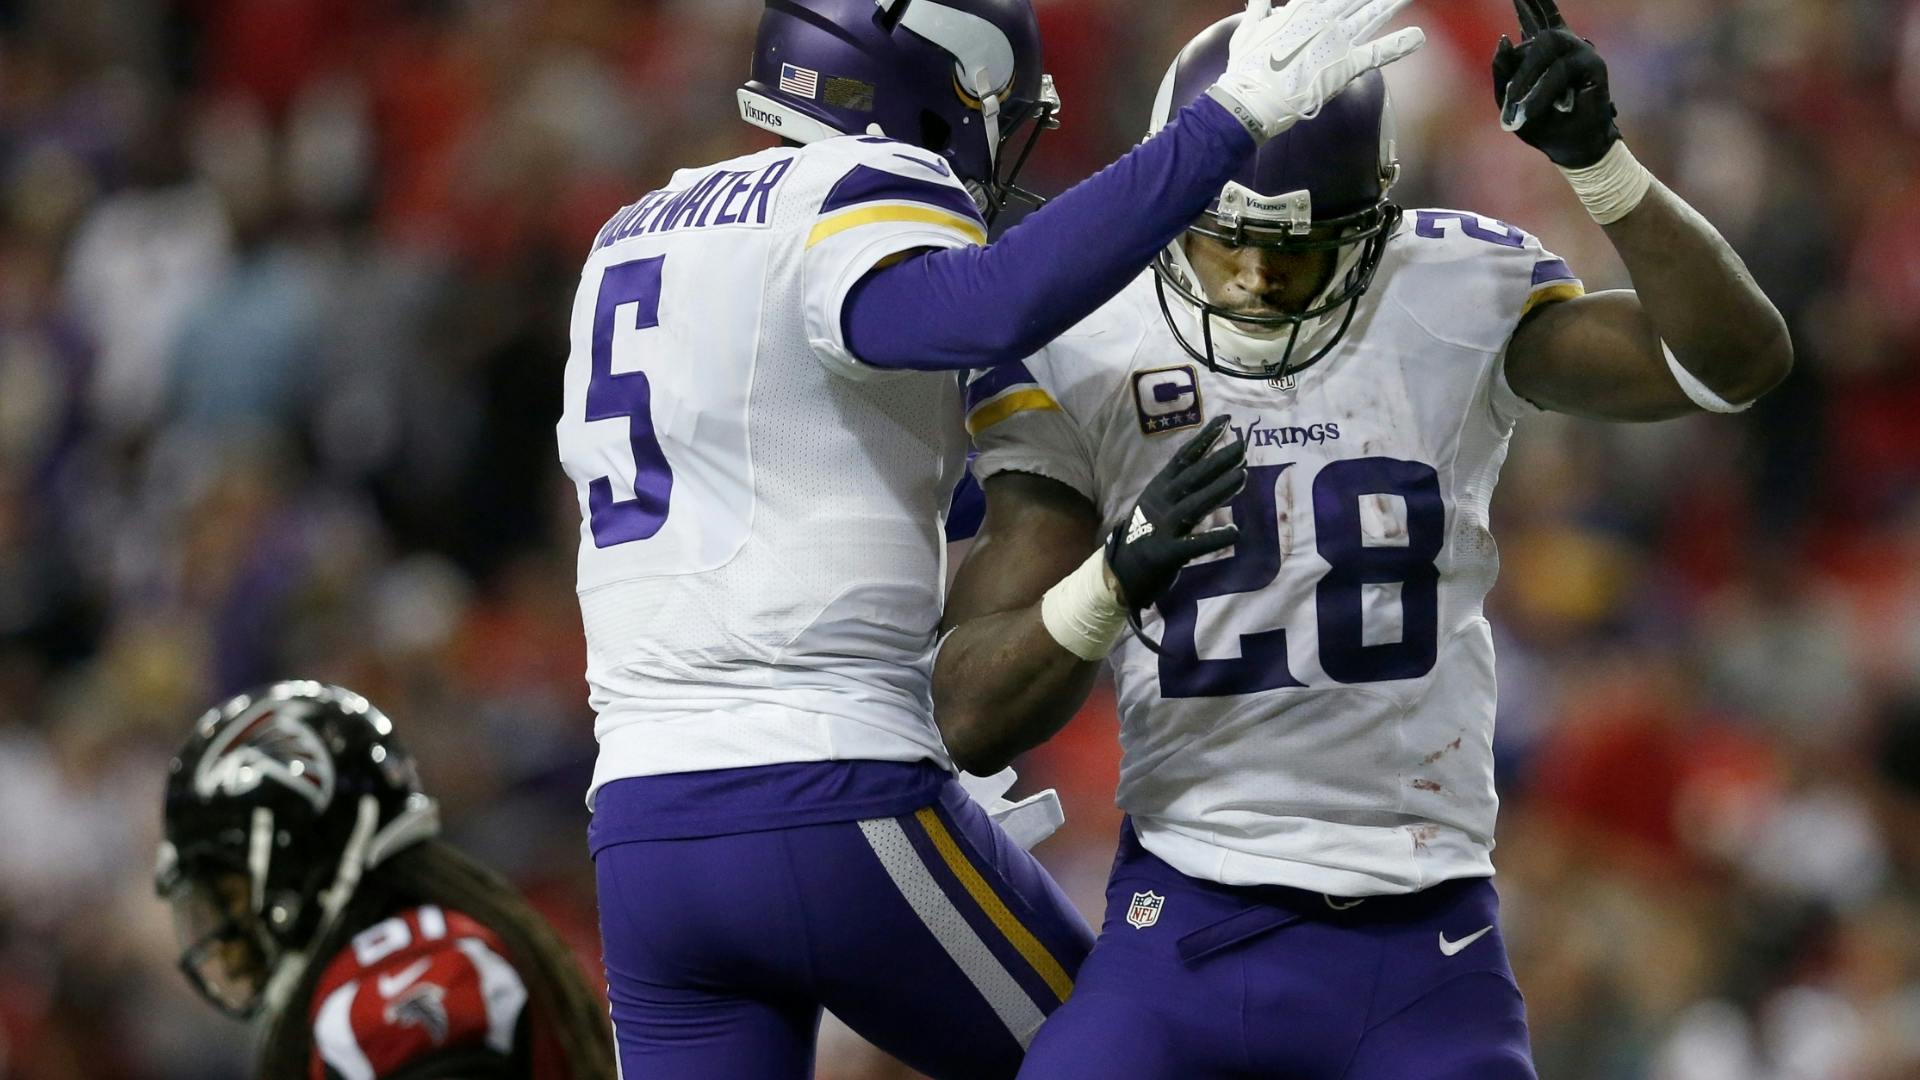 Vikings players were happy with a victory on the road in Atlanta, keeping them atop the NFC North.